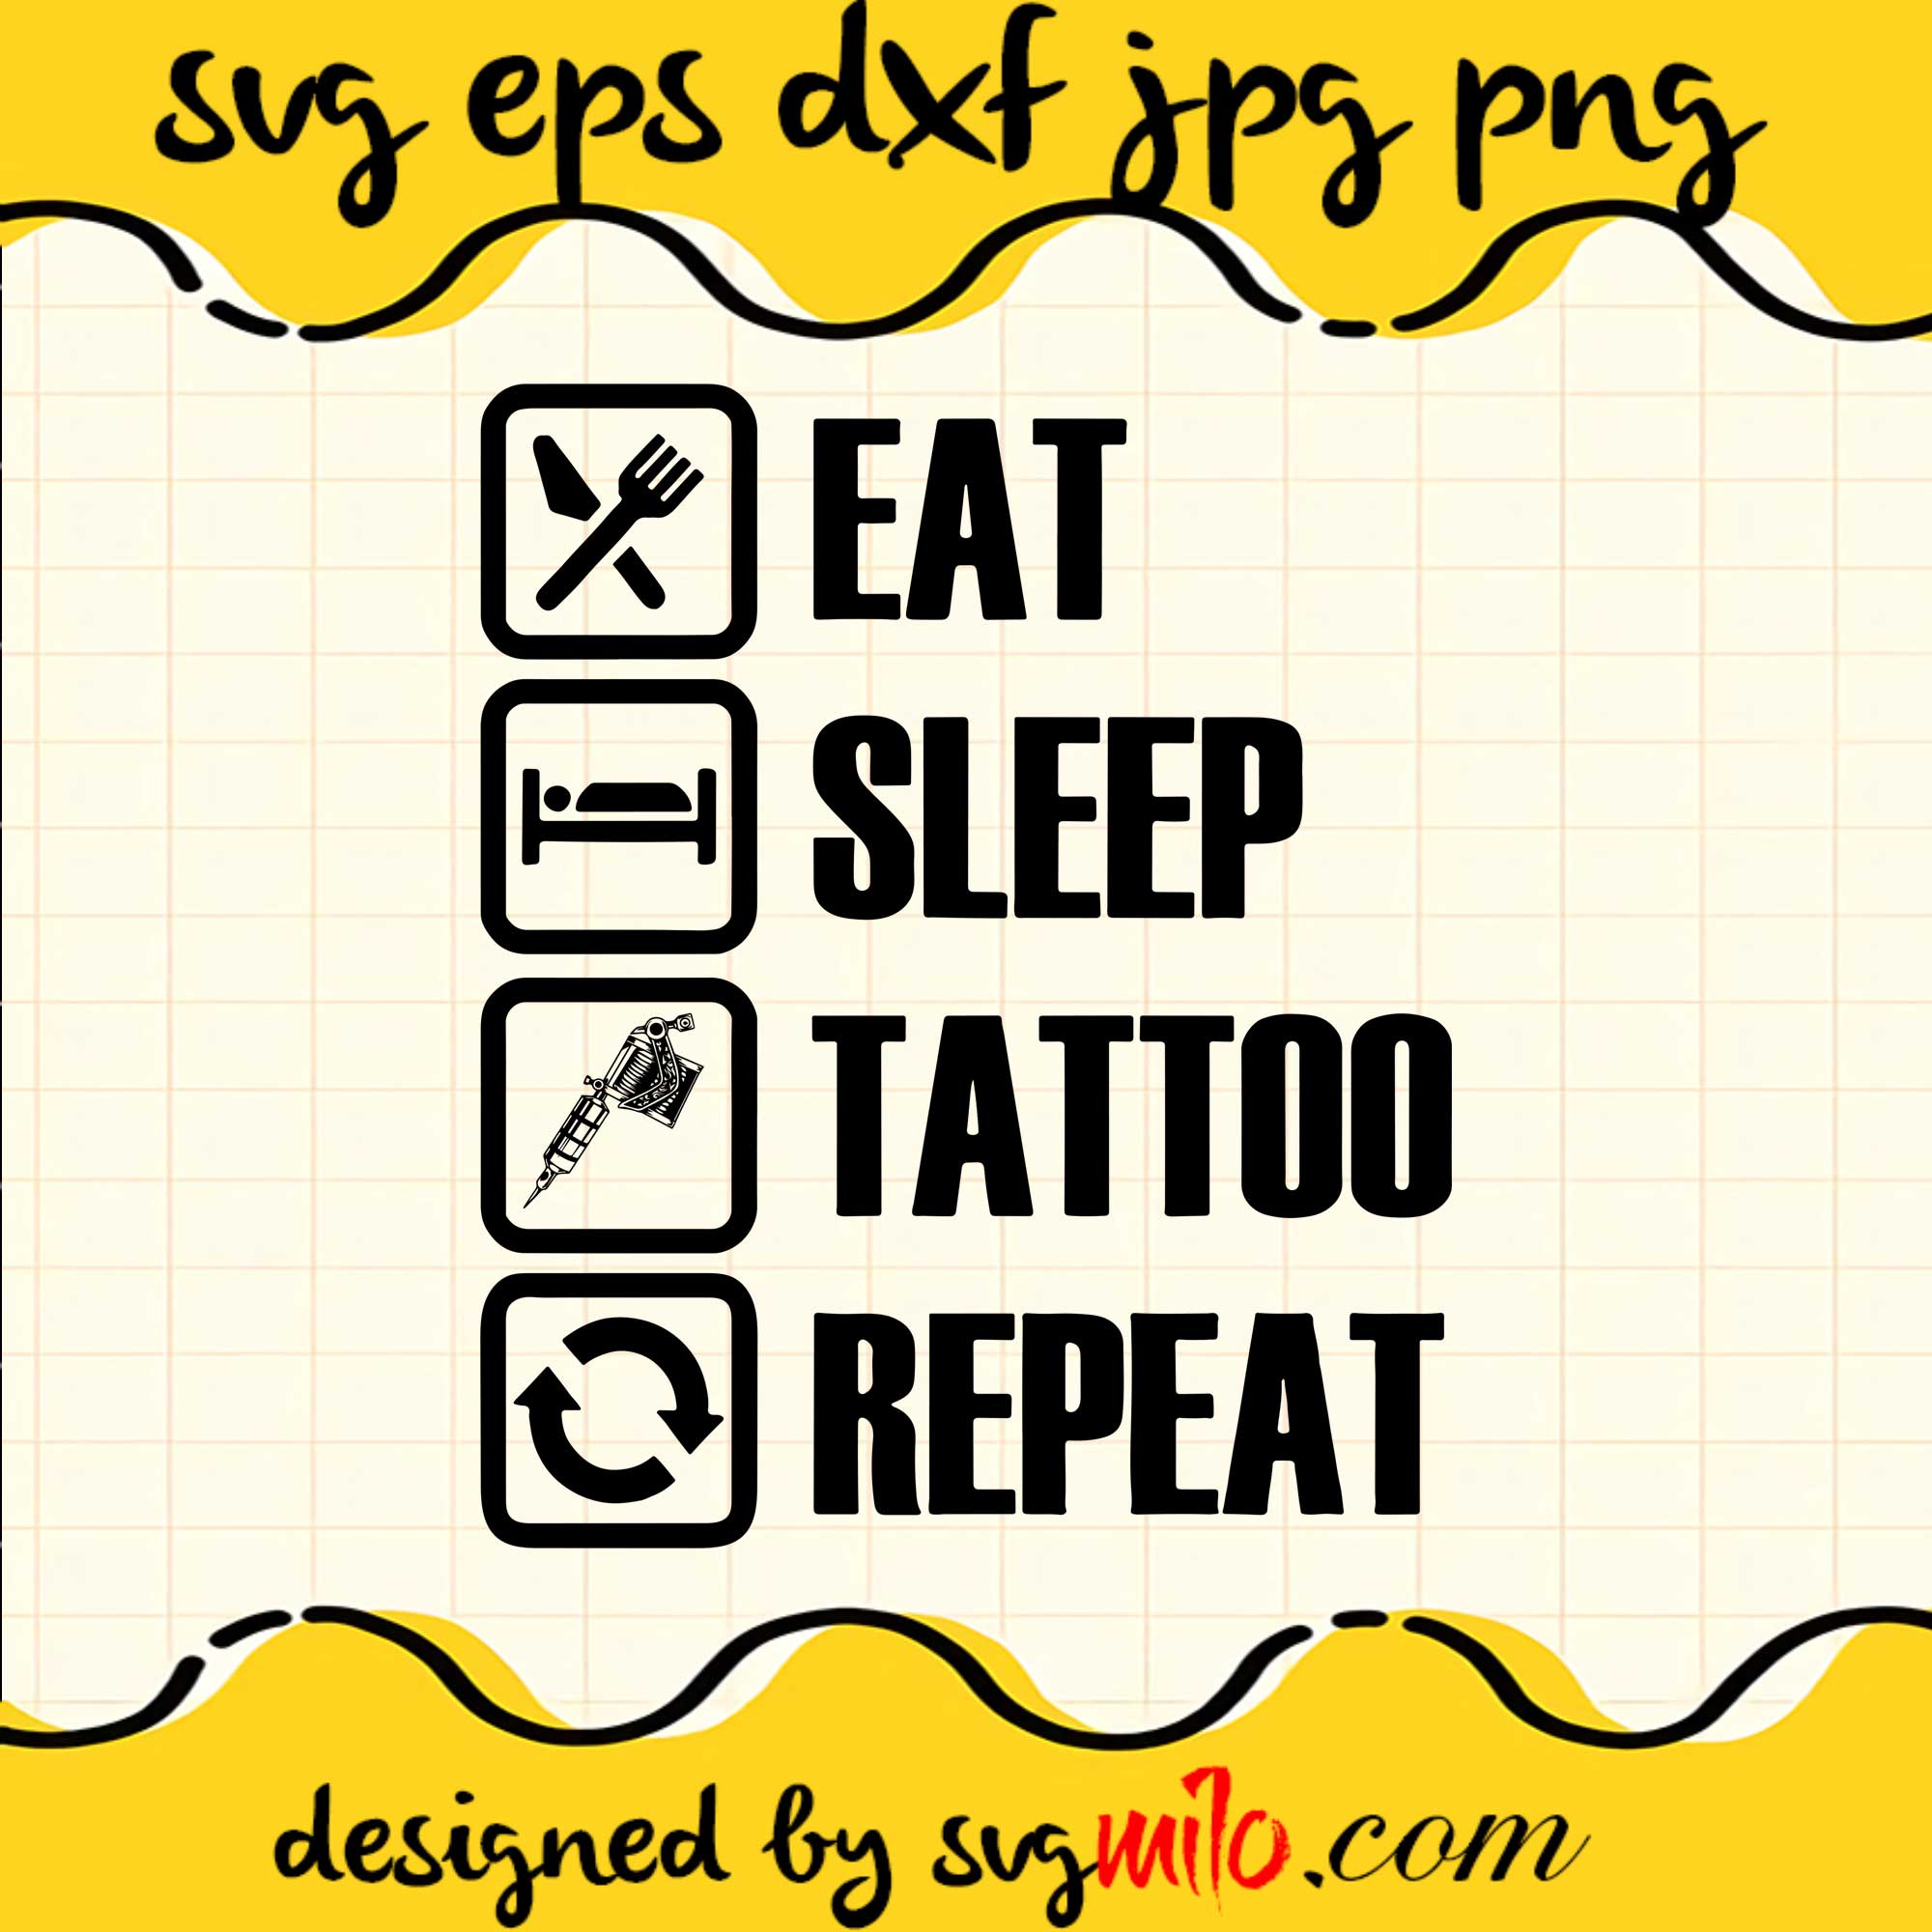 Eat Sleep Tattoo Repeat SVG PNG DXF EPS Cut Files For Cricut Silhouette,Premium quality SVG - SVGMILO